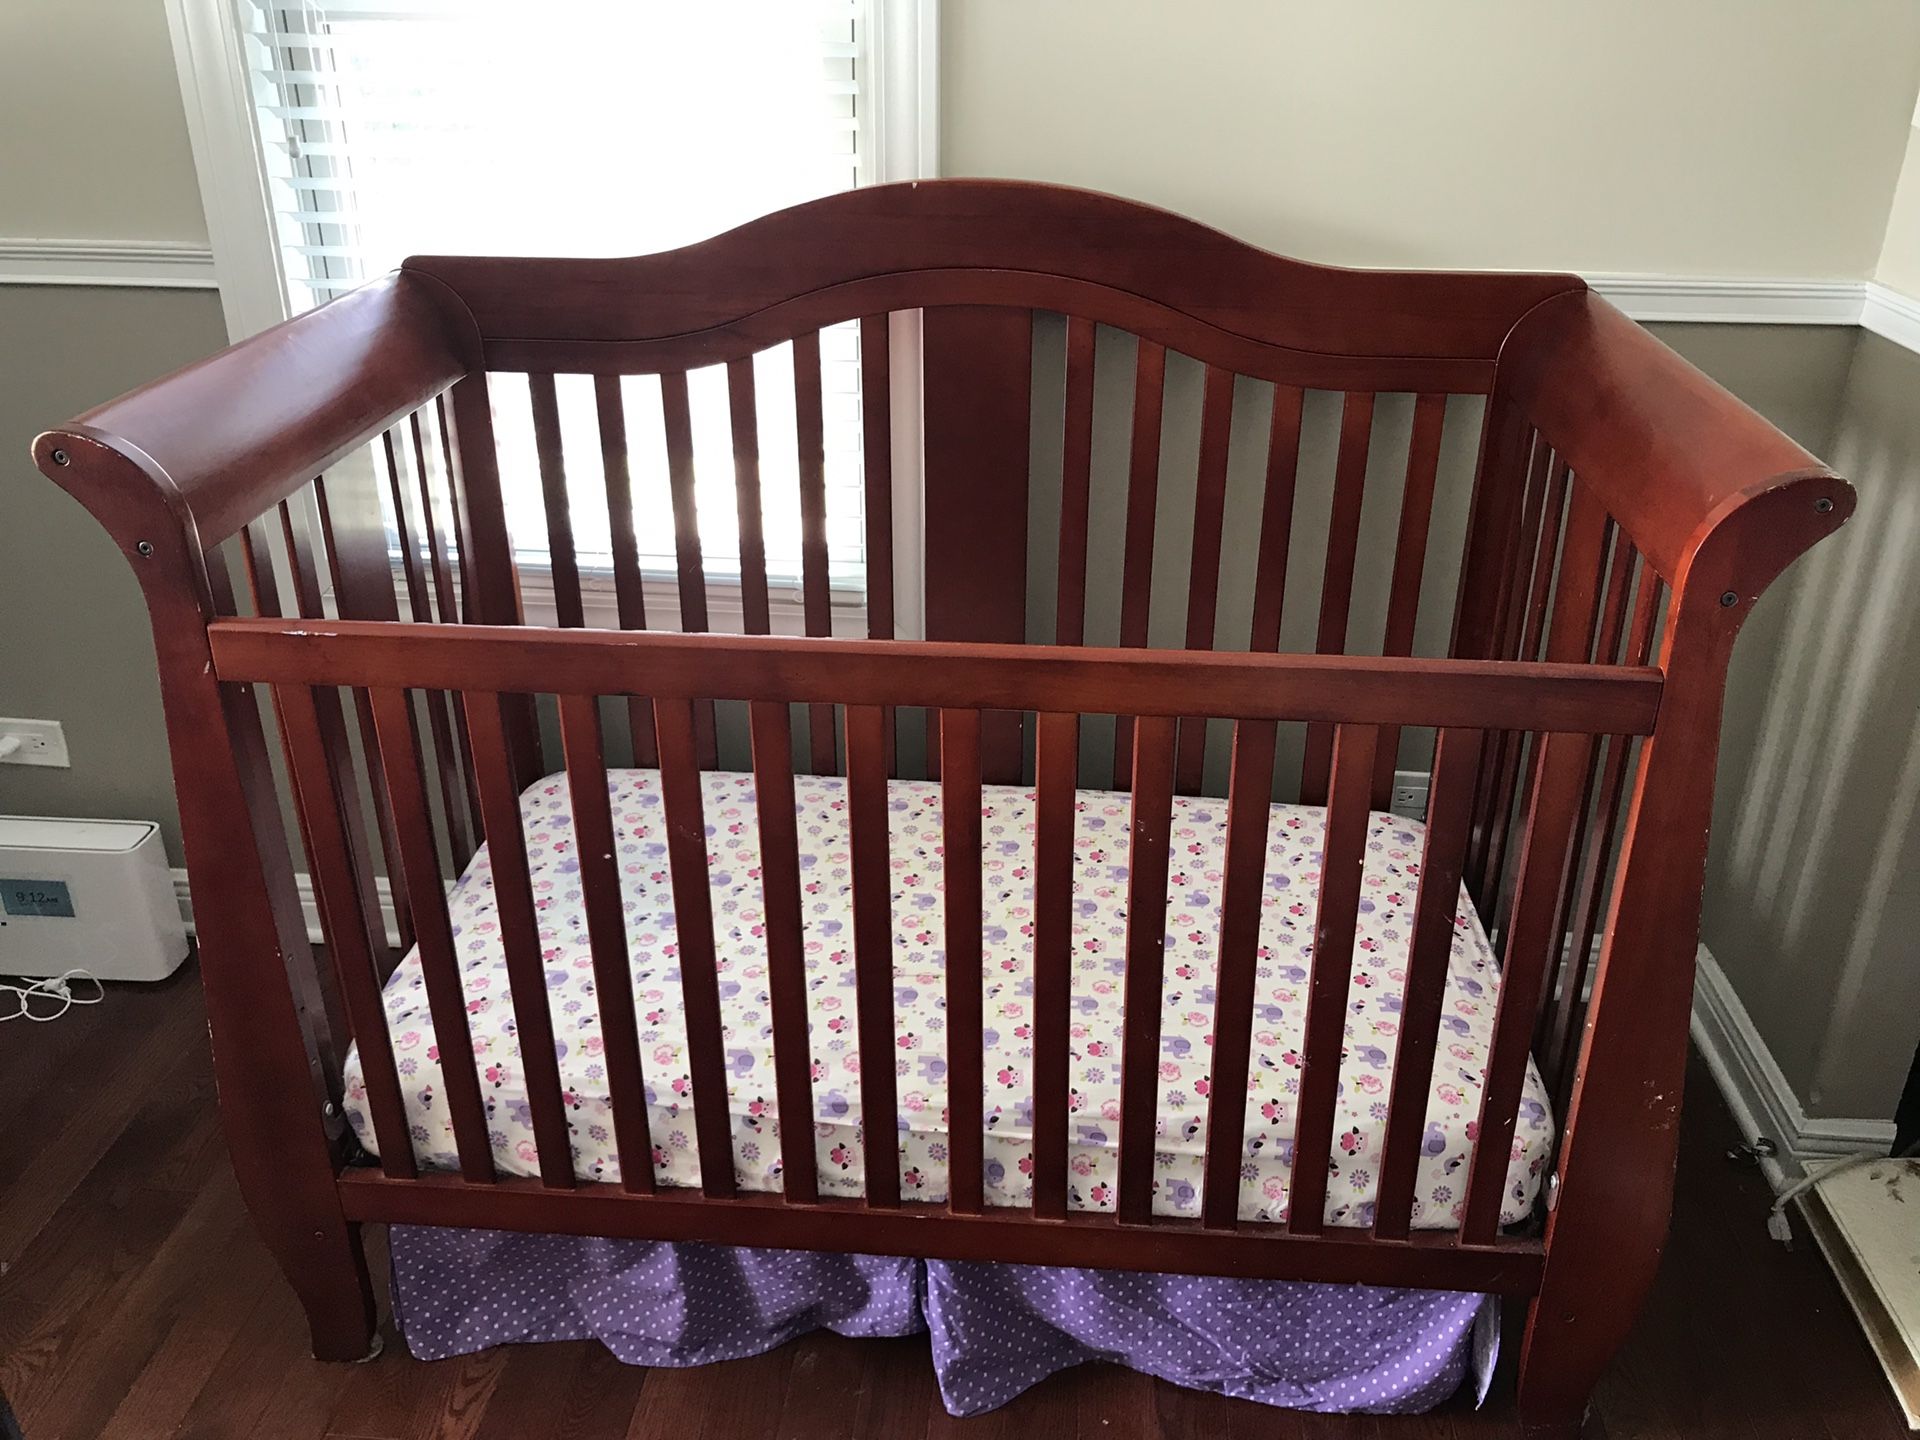 Crib (4x1) and changing table